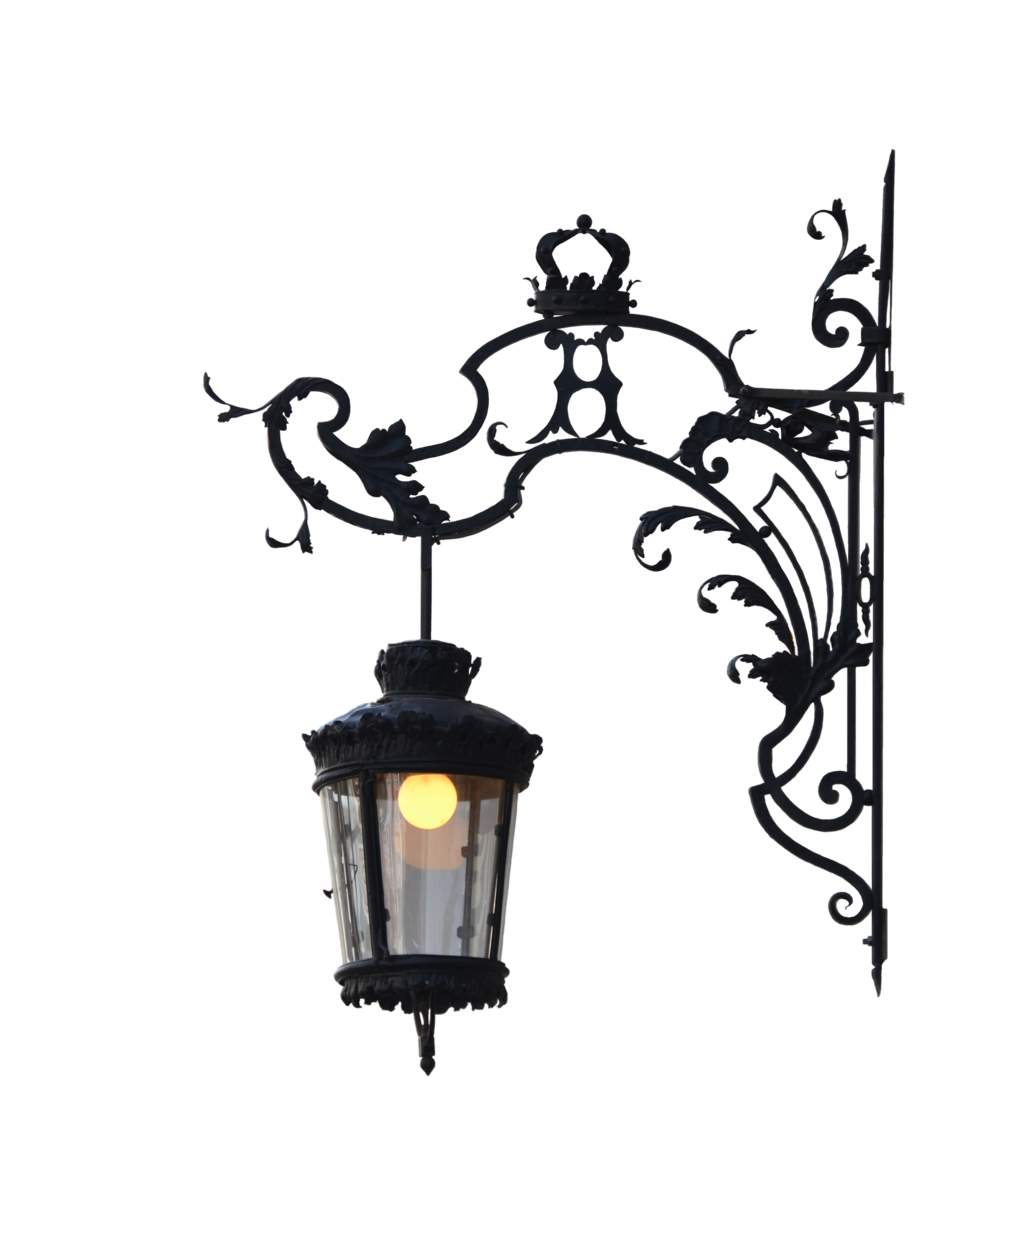 Decorative Light Lamp PNG High-Quality Image